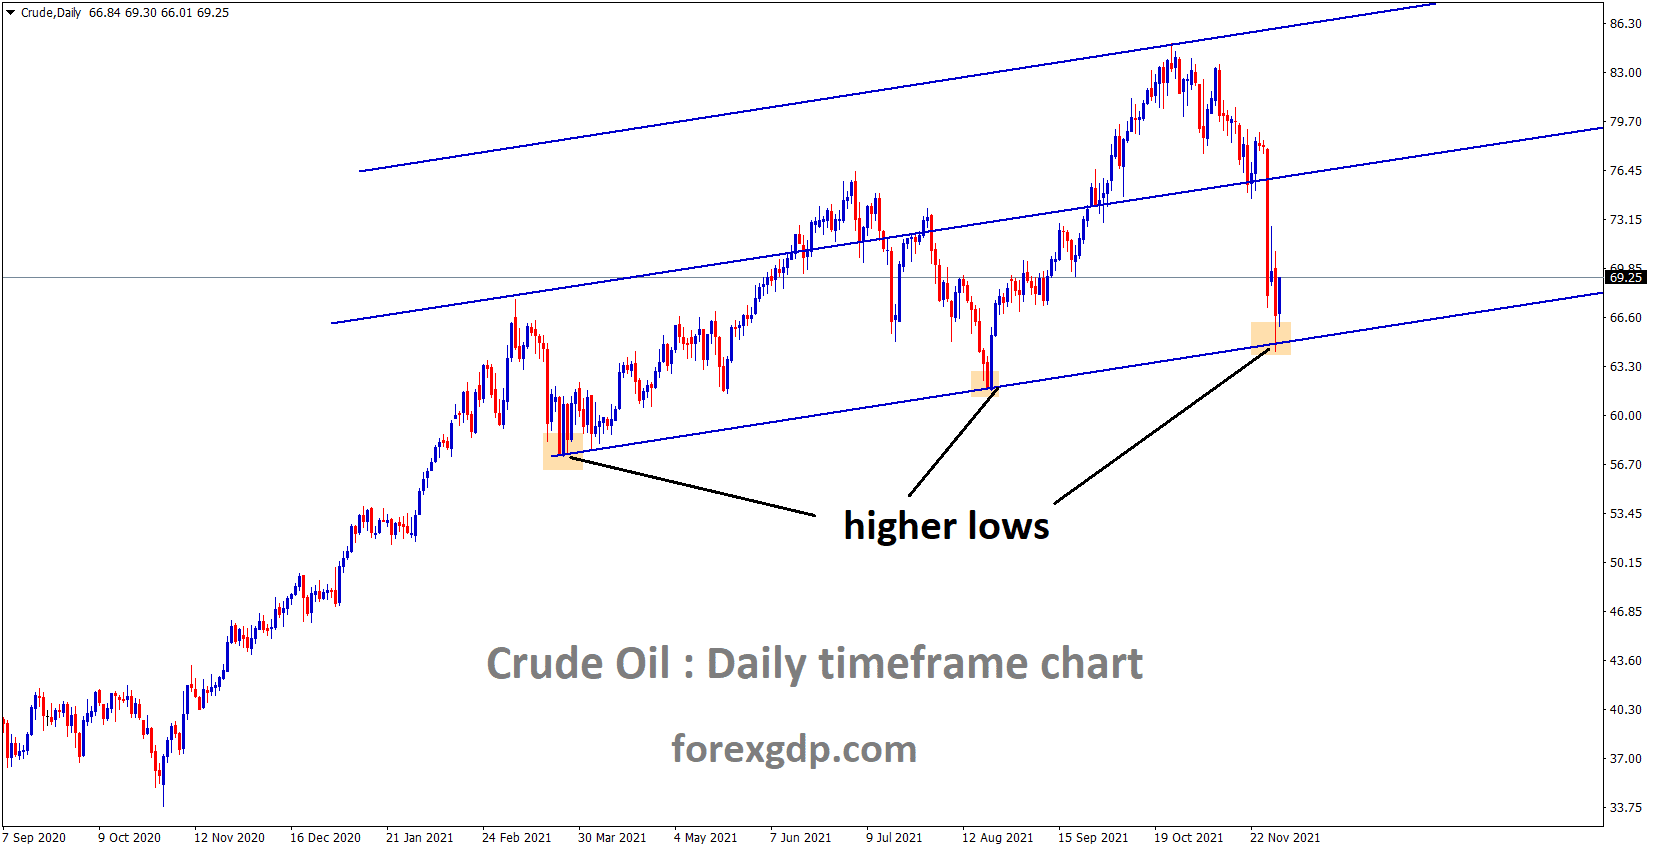 Crude oil is moving in an Ascending channel and the market is rebounding from the higher low area of the channel